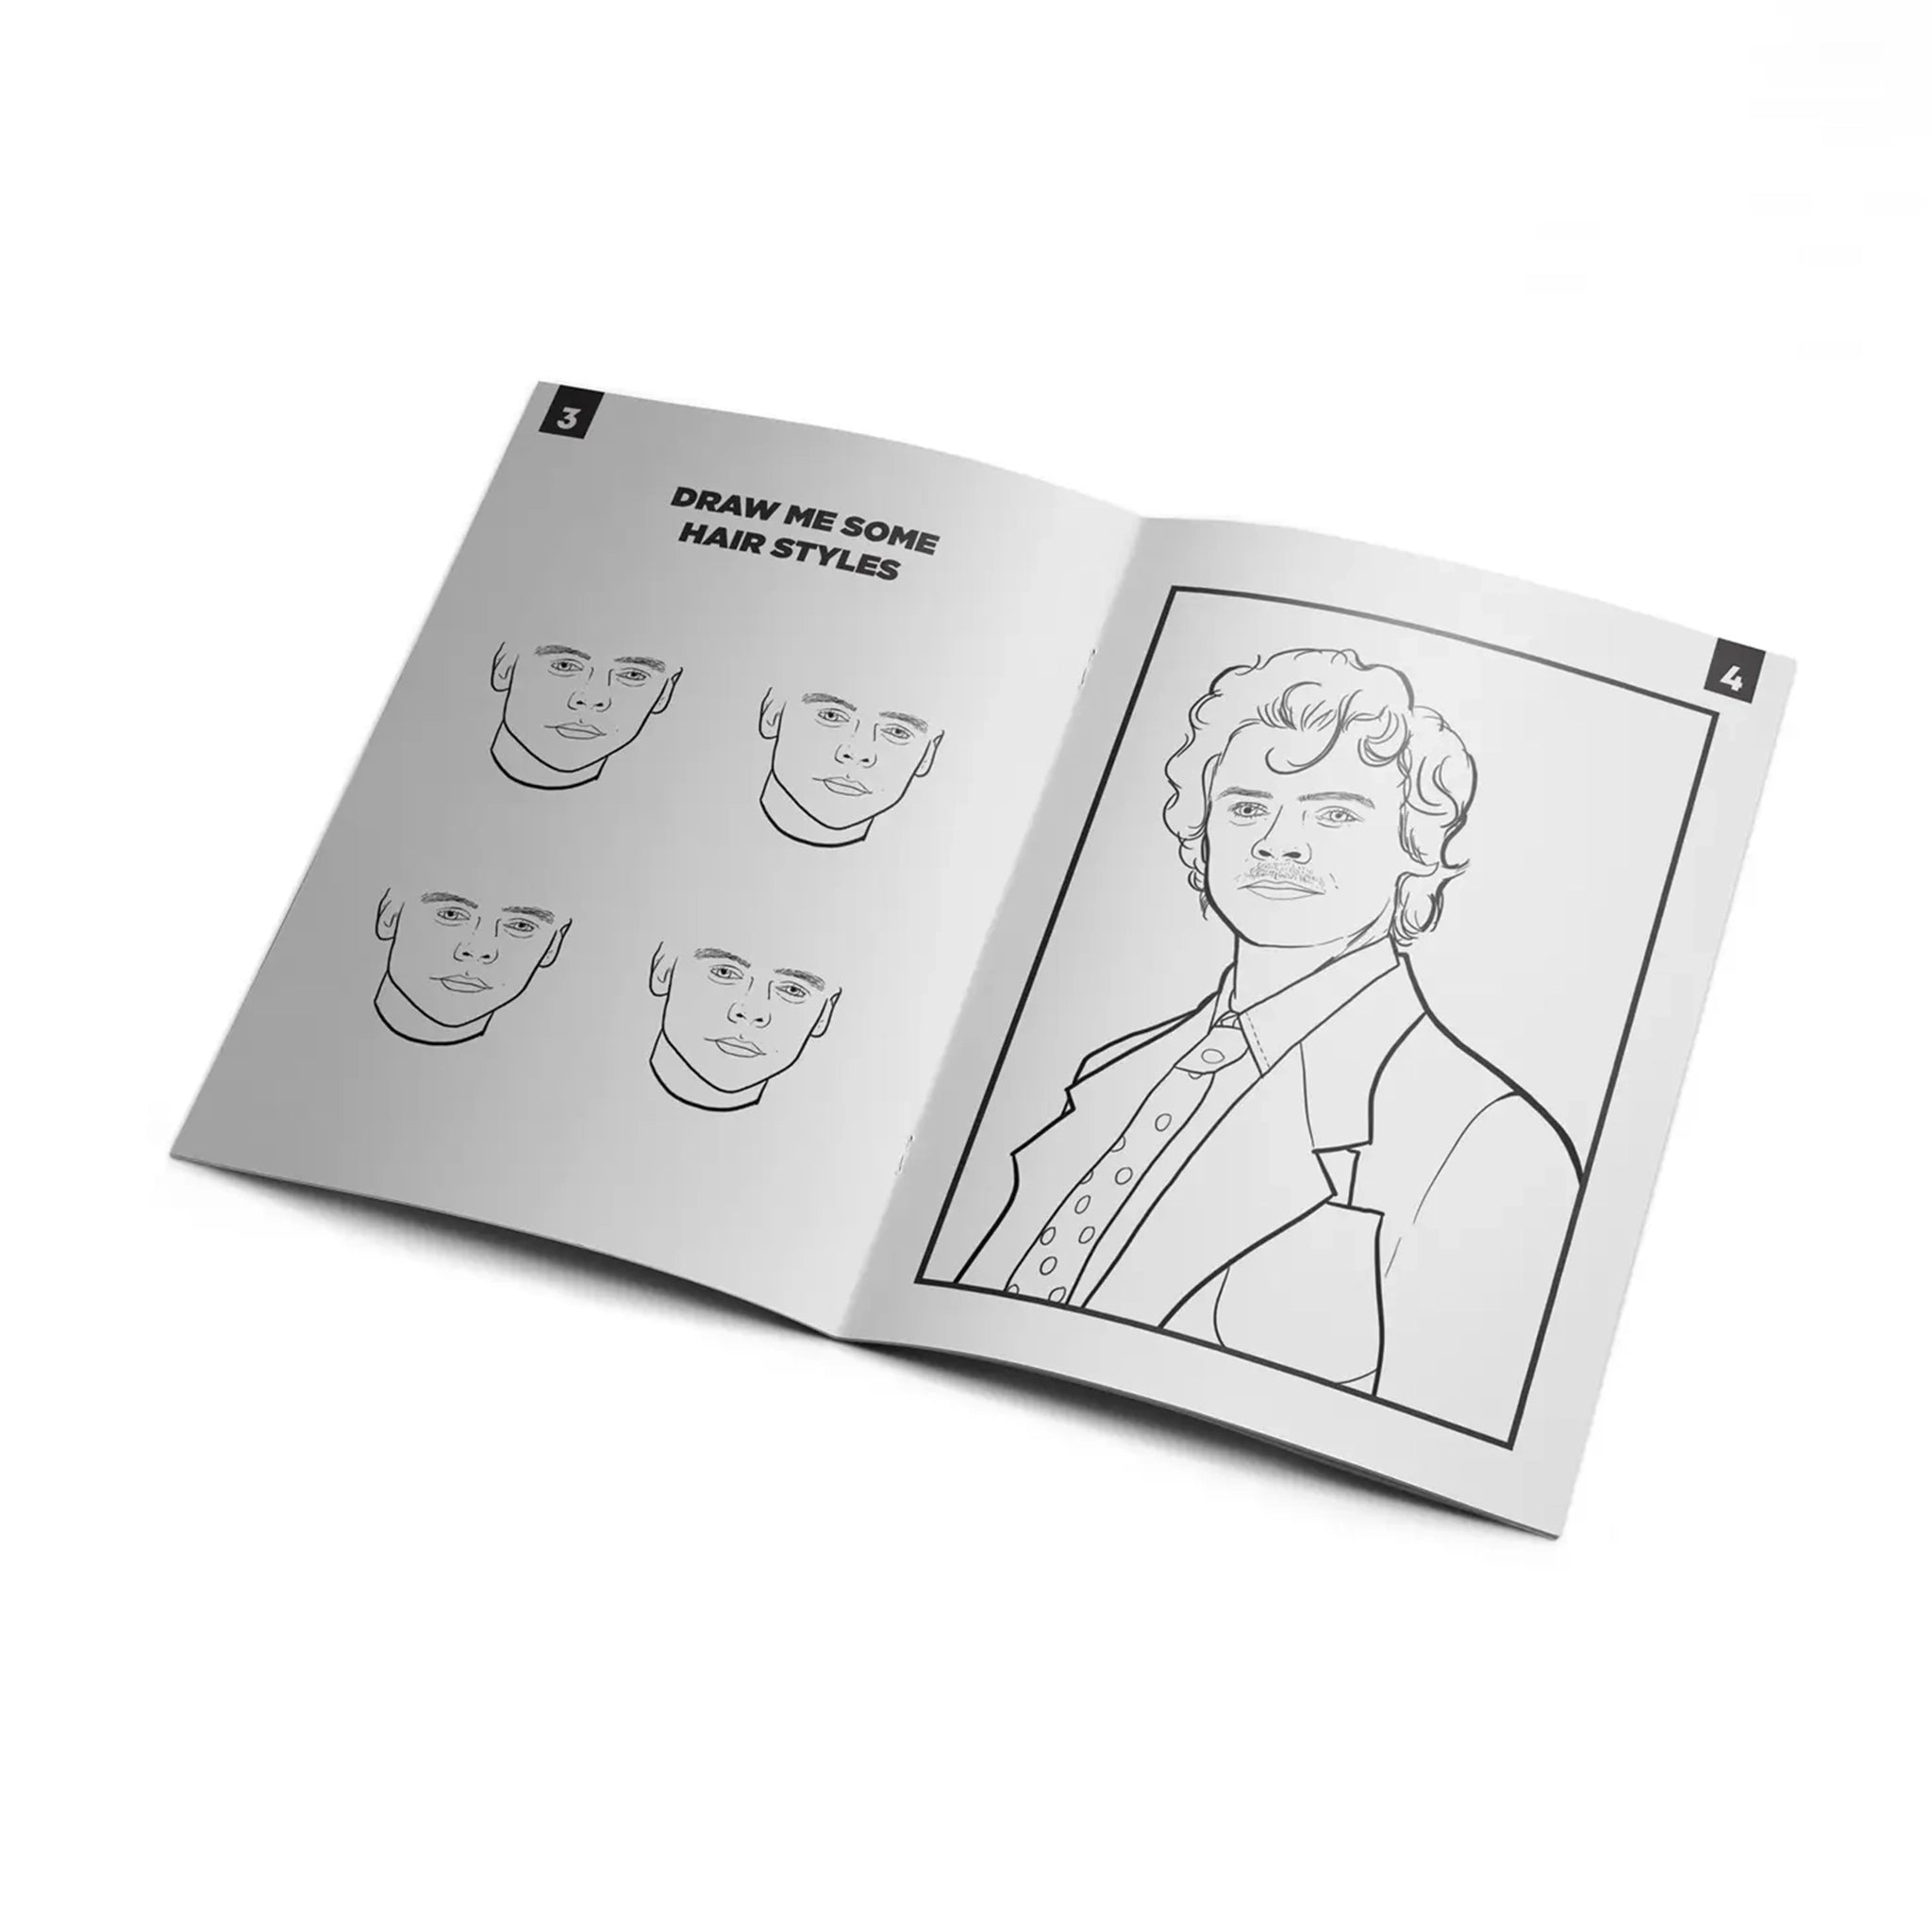 Another page inside the book that has an illustration of Harry Styles meant for coloring as well as an activity on the other side that says, "Draw me some harry styles" along with blank faces meant for drawing in facial hair, head hair, etc. 